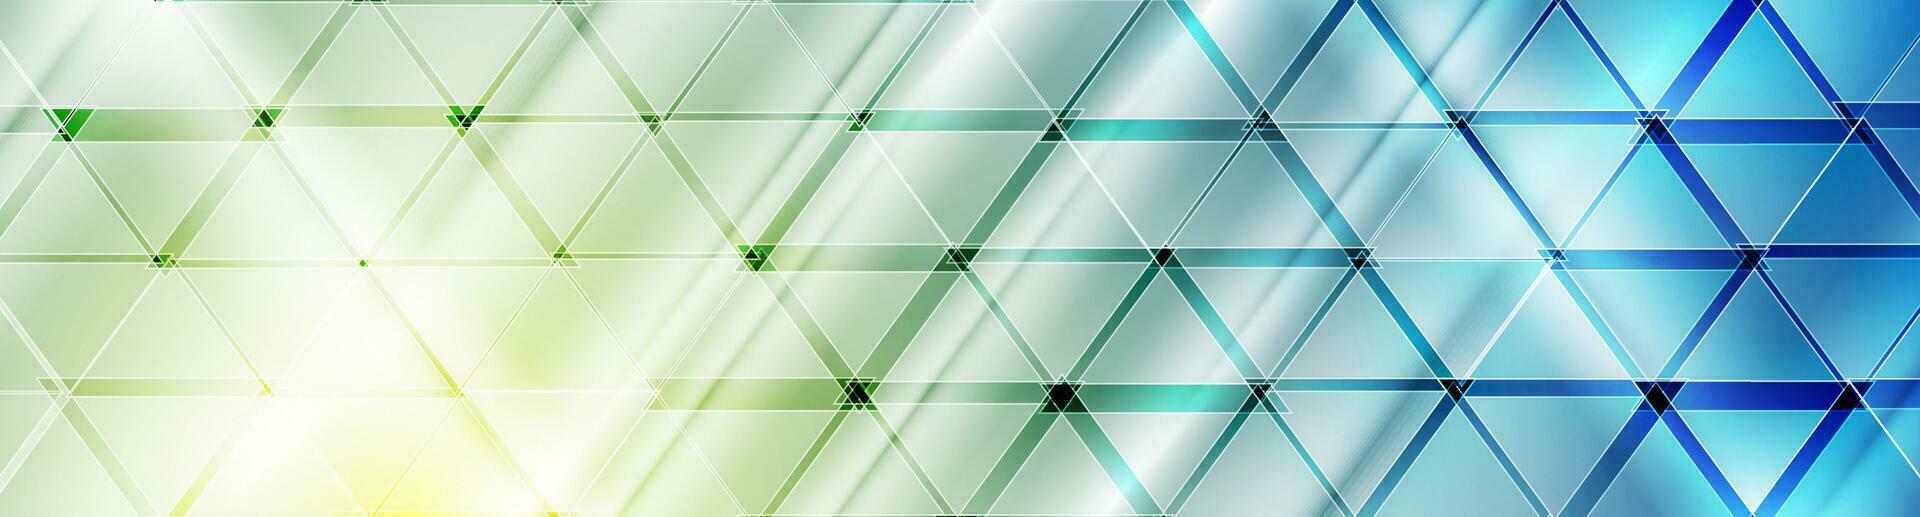 Blue yellow technology banner background with glossy triangles vector